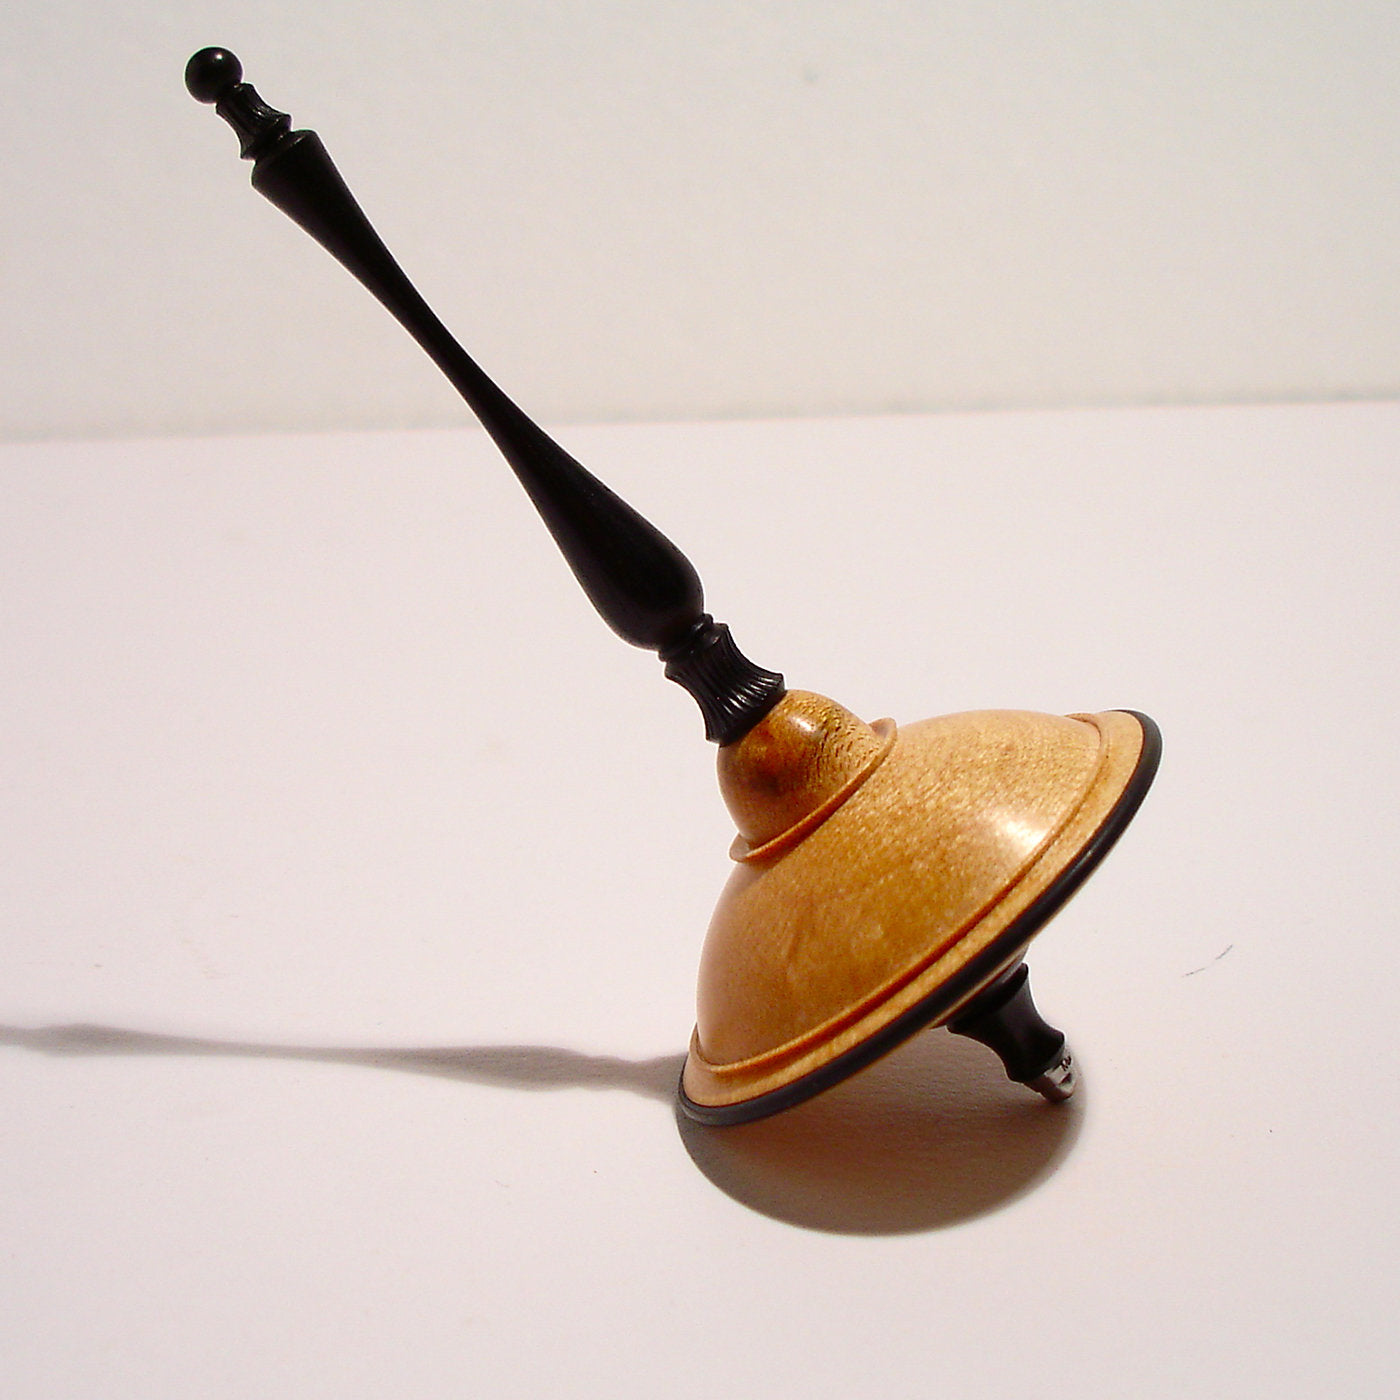 Ebony and Maple Spinning Top #1 - Alternative view 1